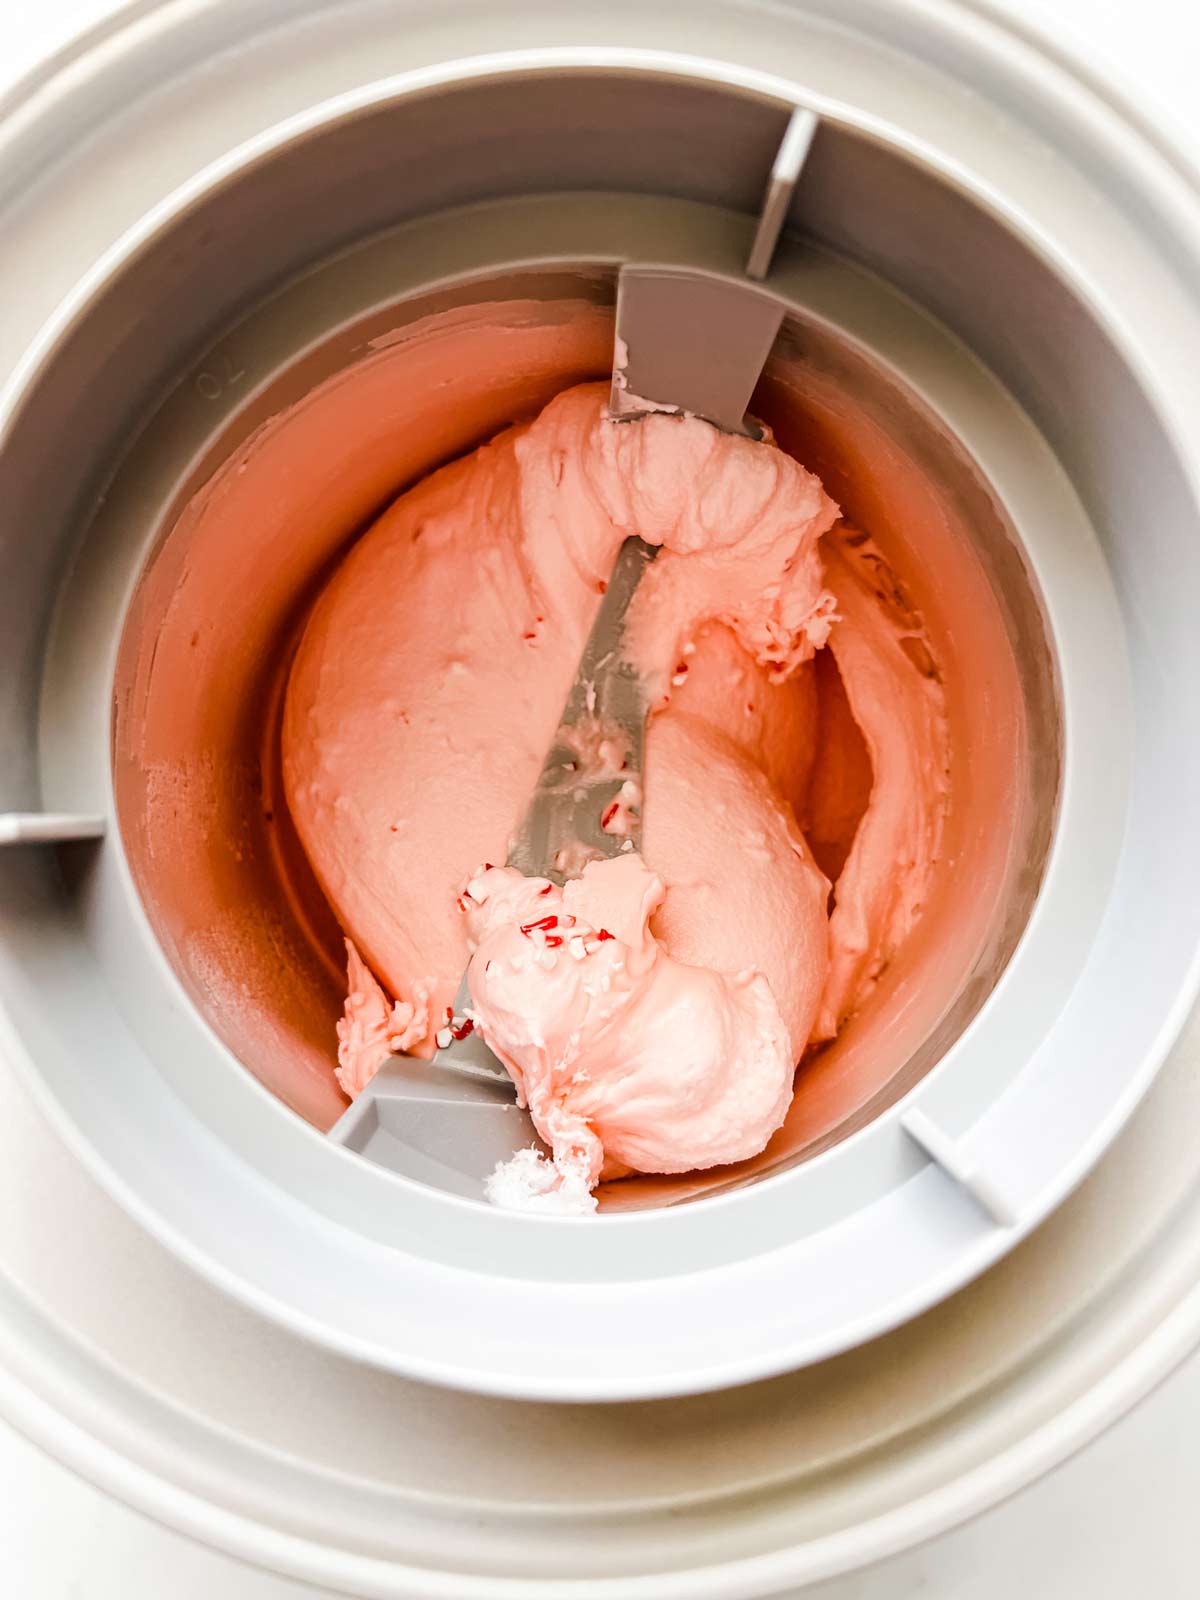 Peppermint ice cream churning in an ice cream maker.